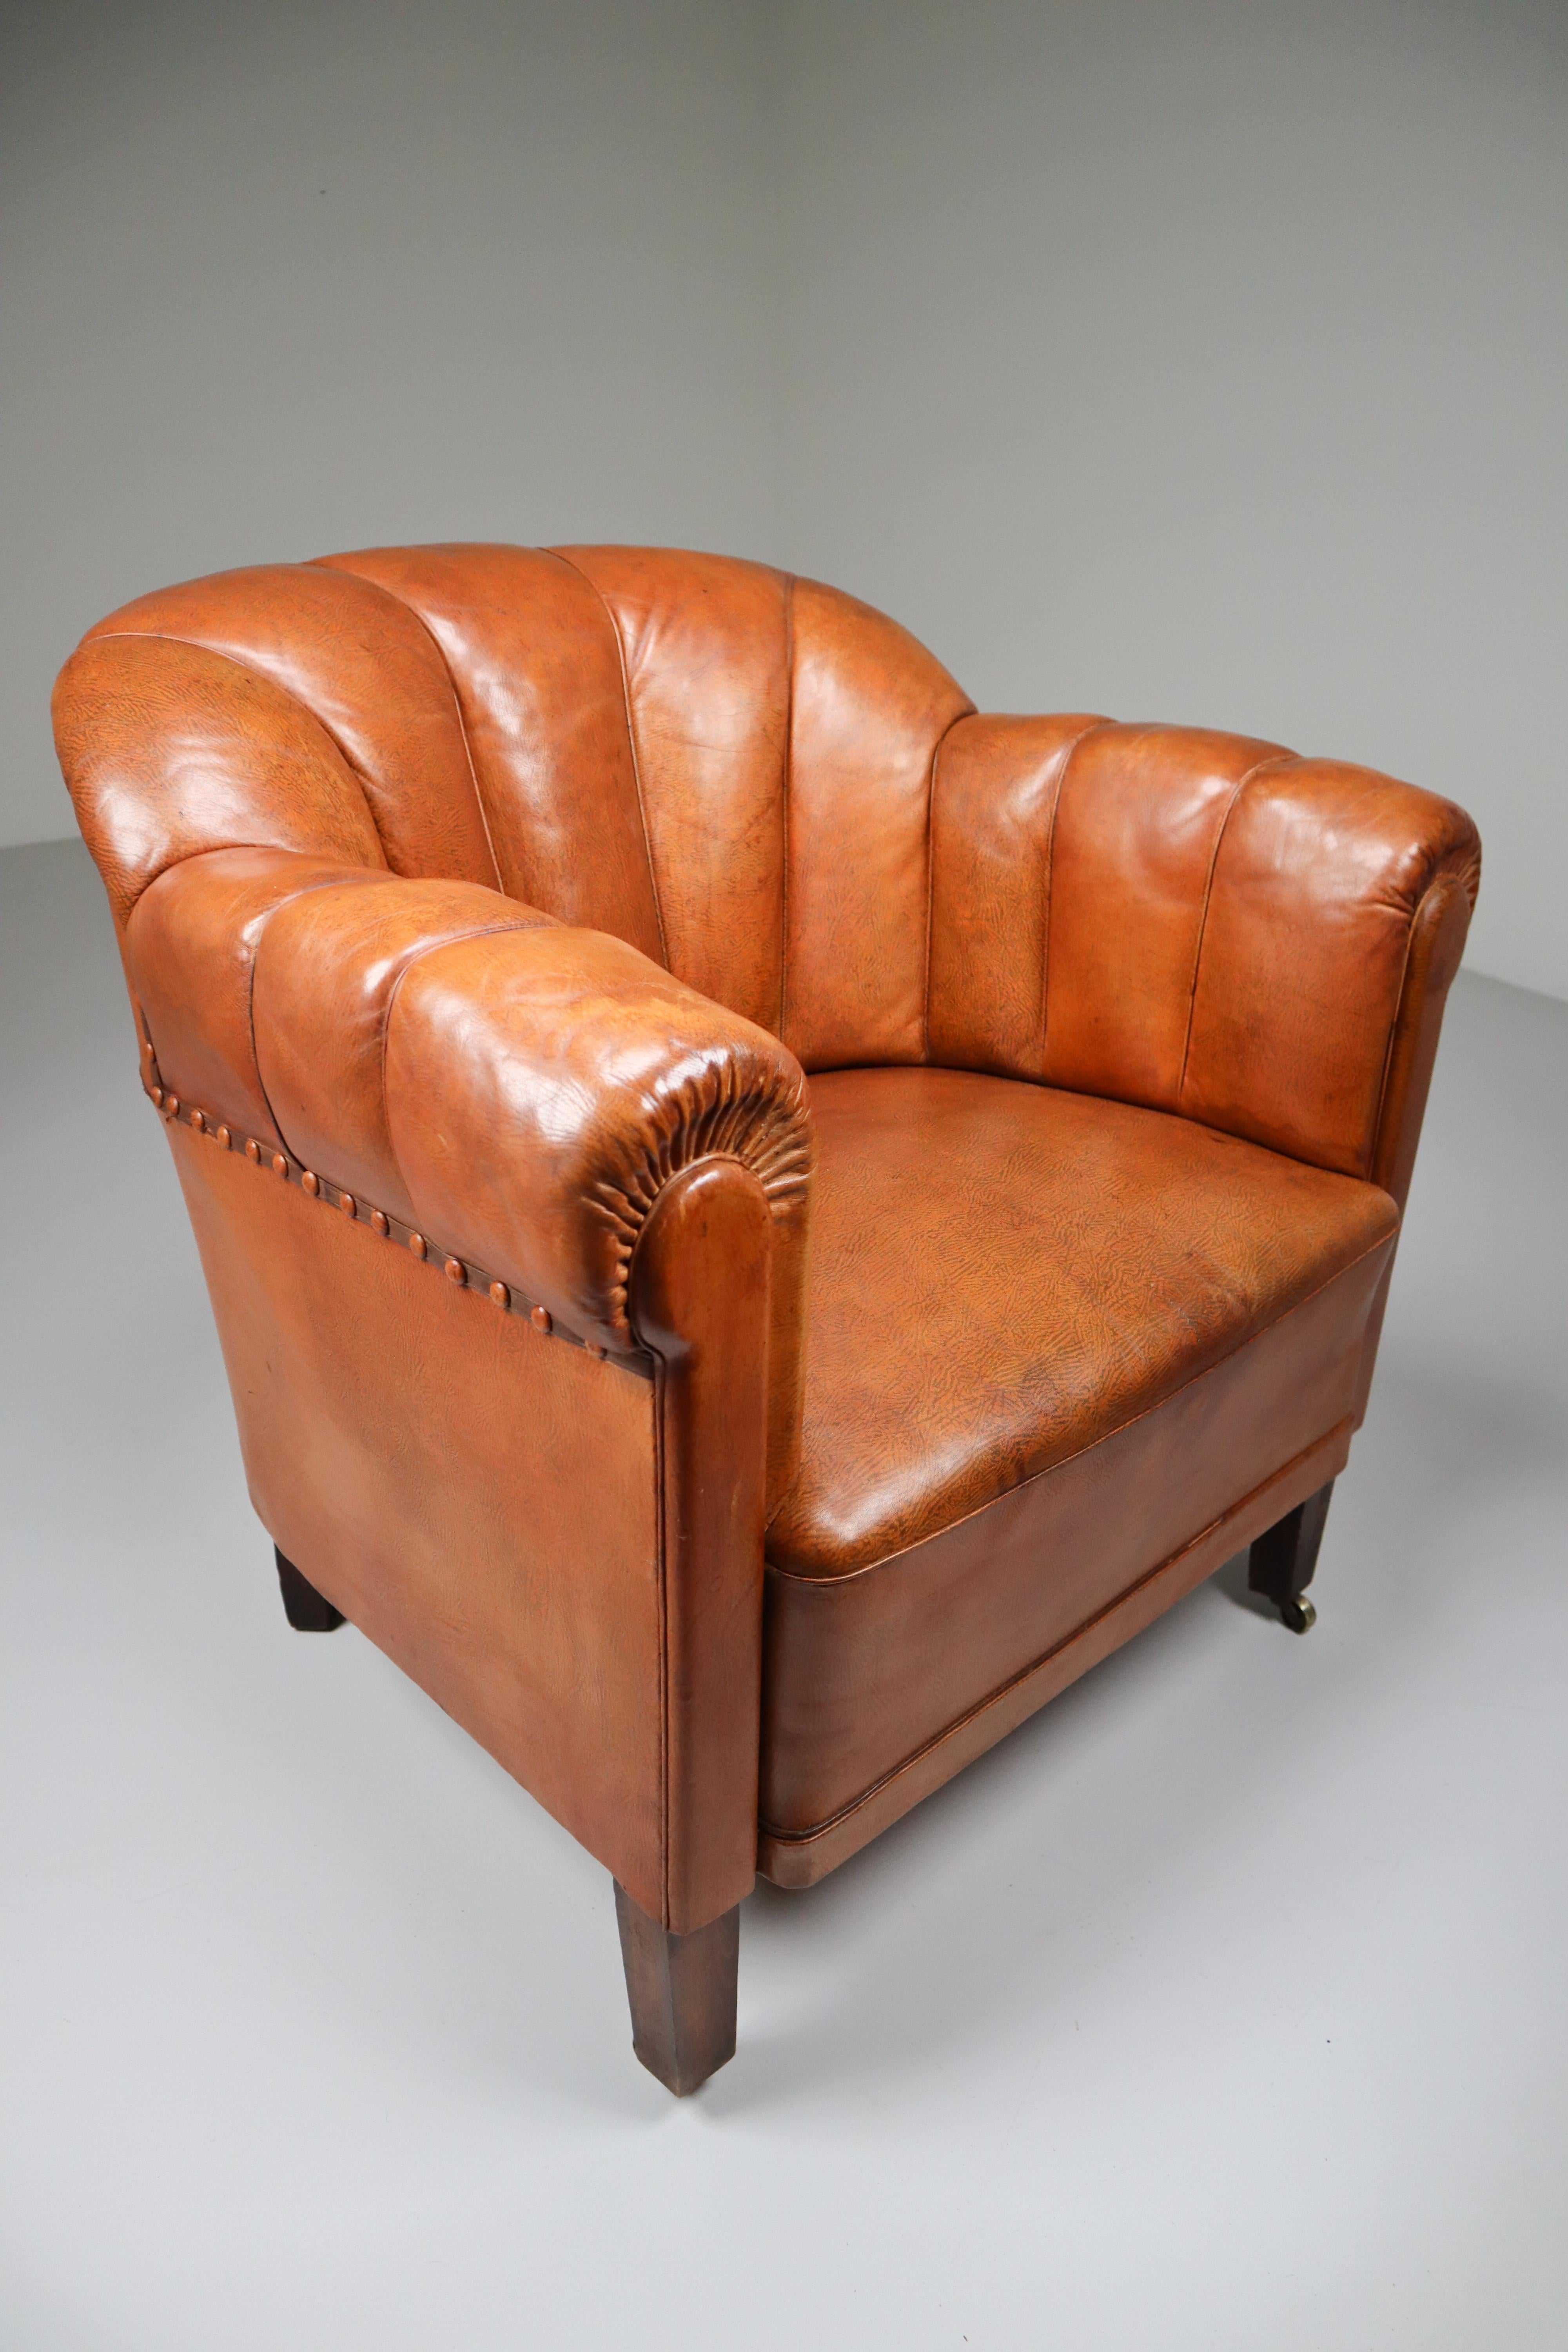 Art Deco club chair in absolutely gorgeous patinated cognac leather and feature metal rivets and wooden legs. The leather is beautifully patinated during use and age, in very good original condition. Prague, 1930s.